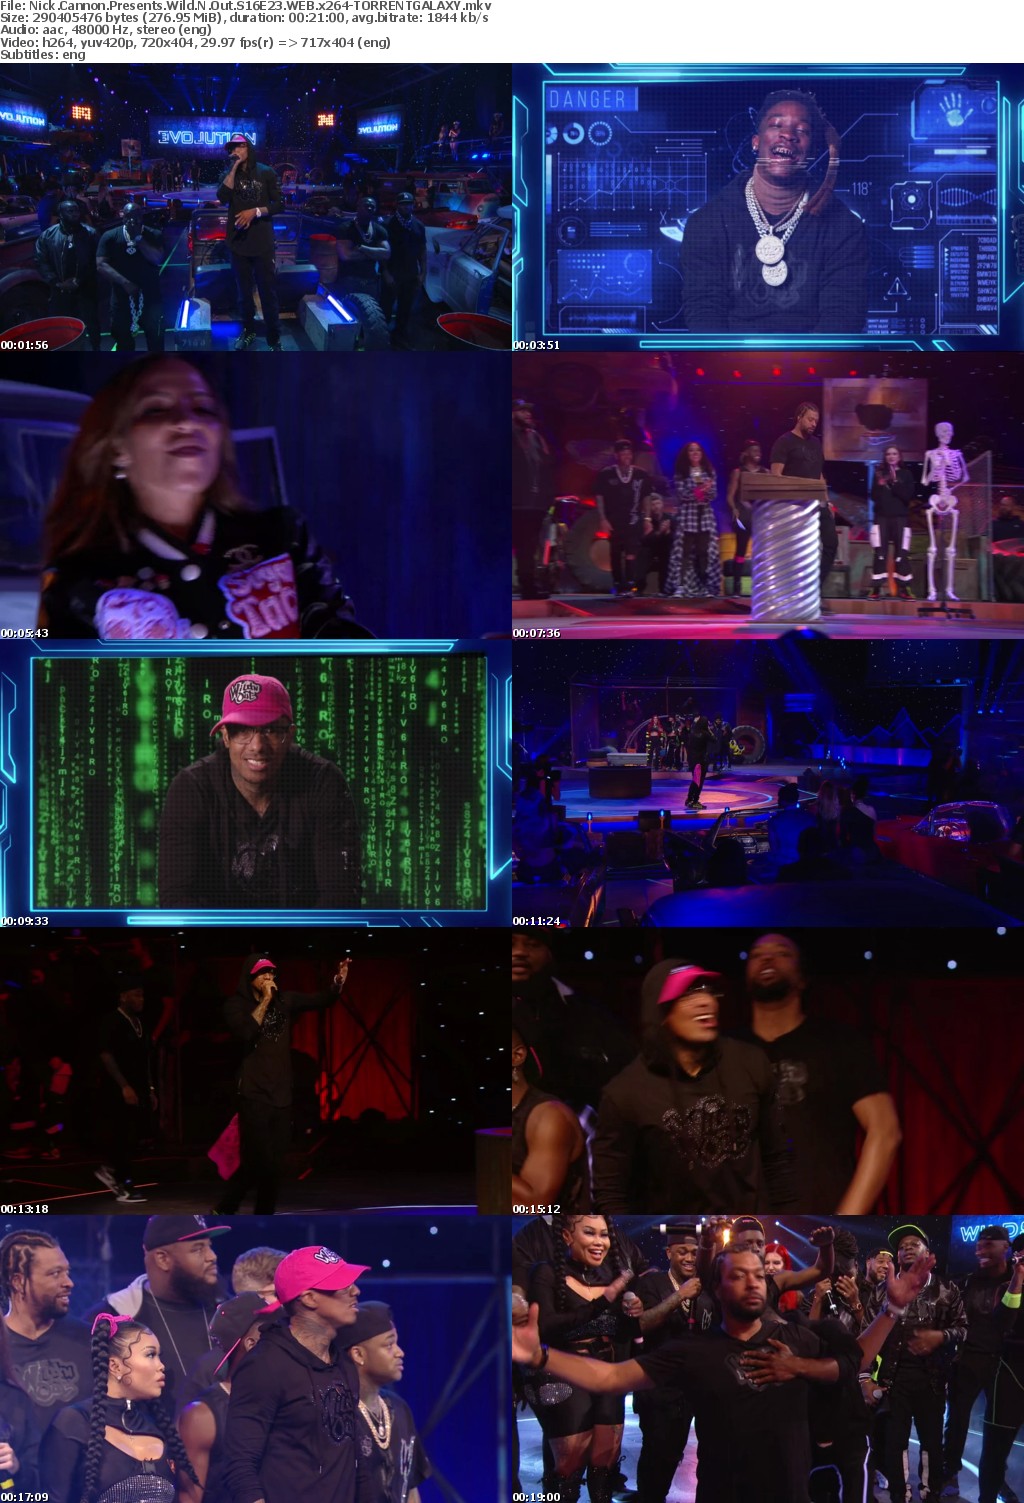 Nick Cannon Presents Wild N Out S16E23 WEB x264-GALAXY